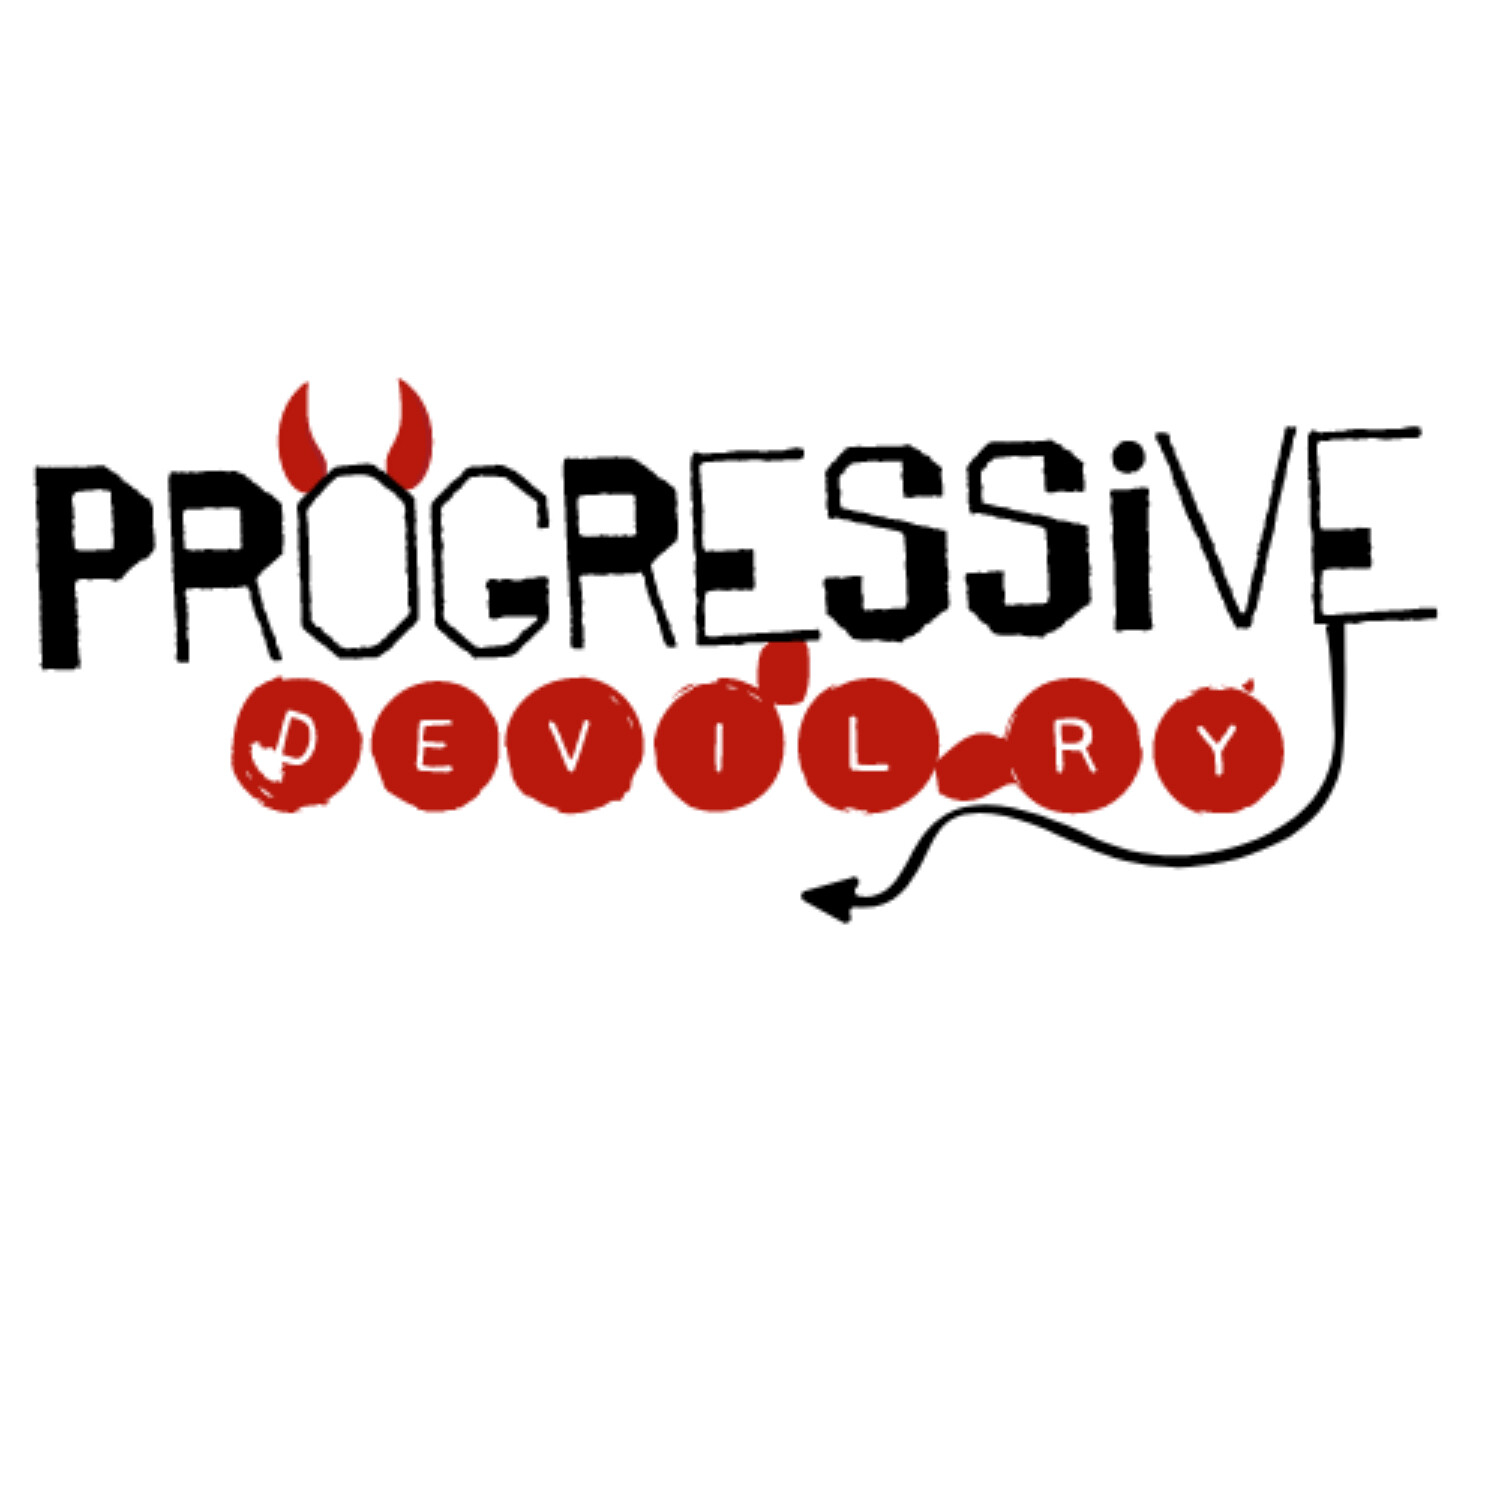 Episode 1.5: Meet the Progressives Behind the Devilry